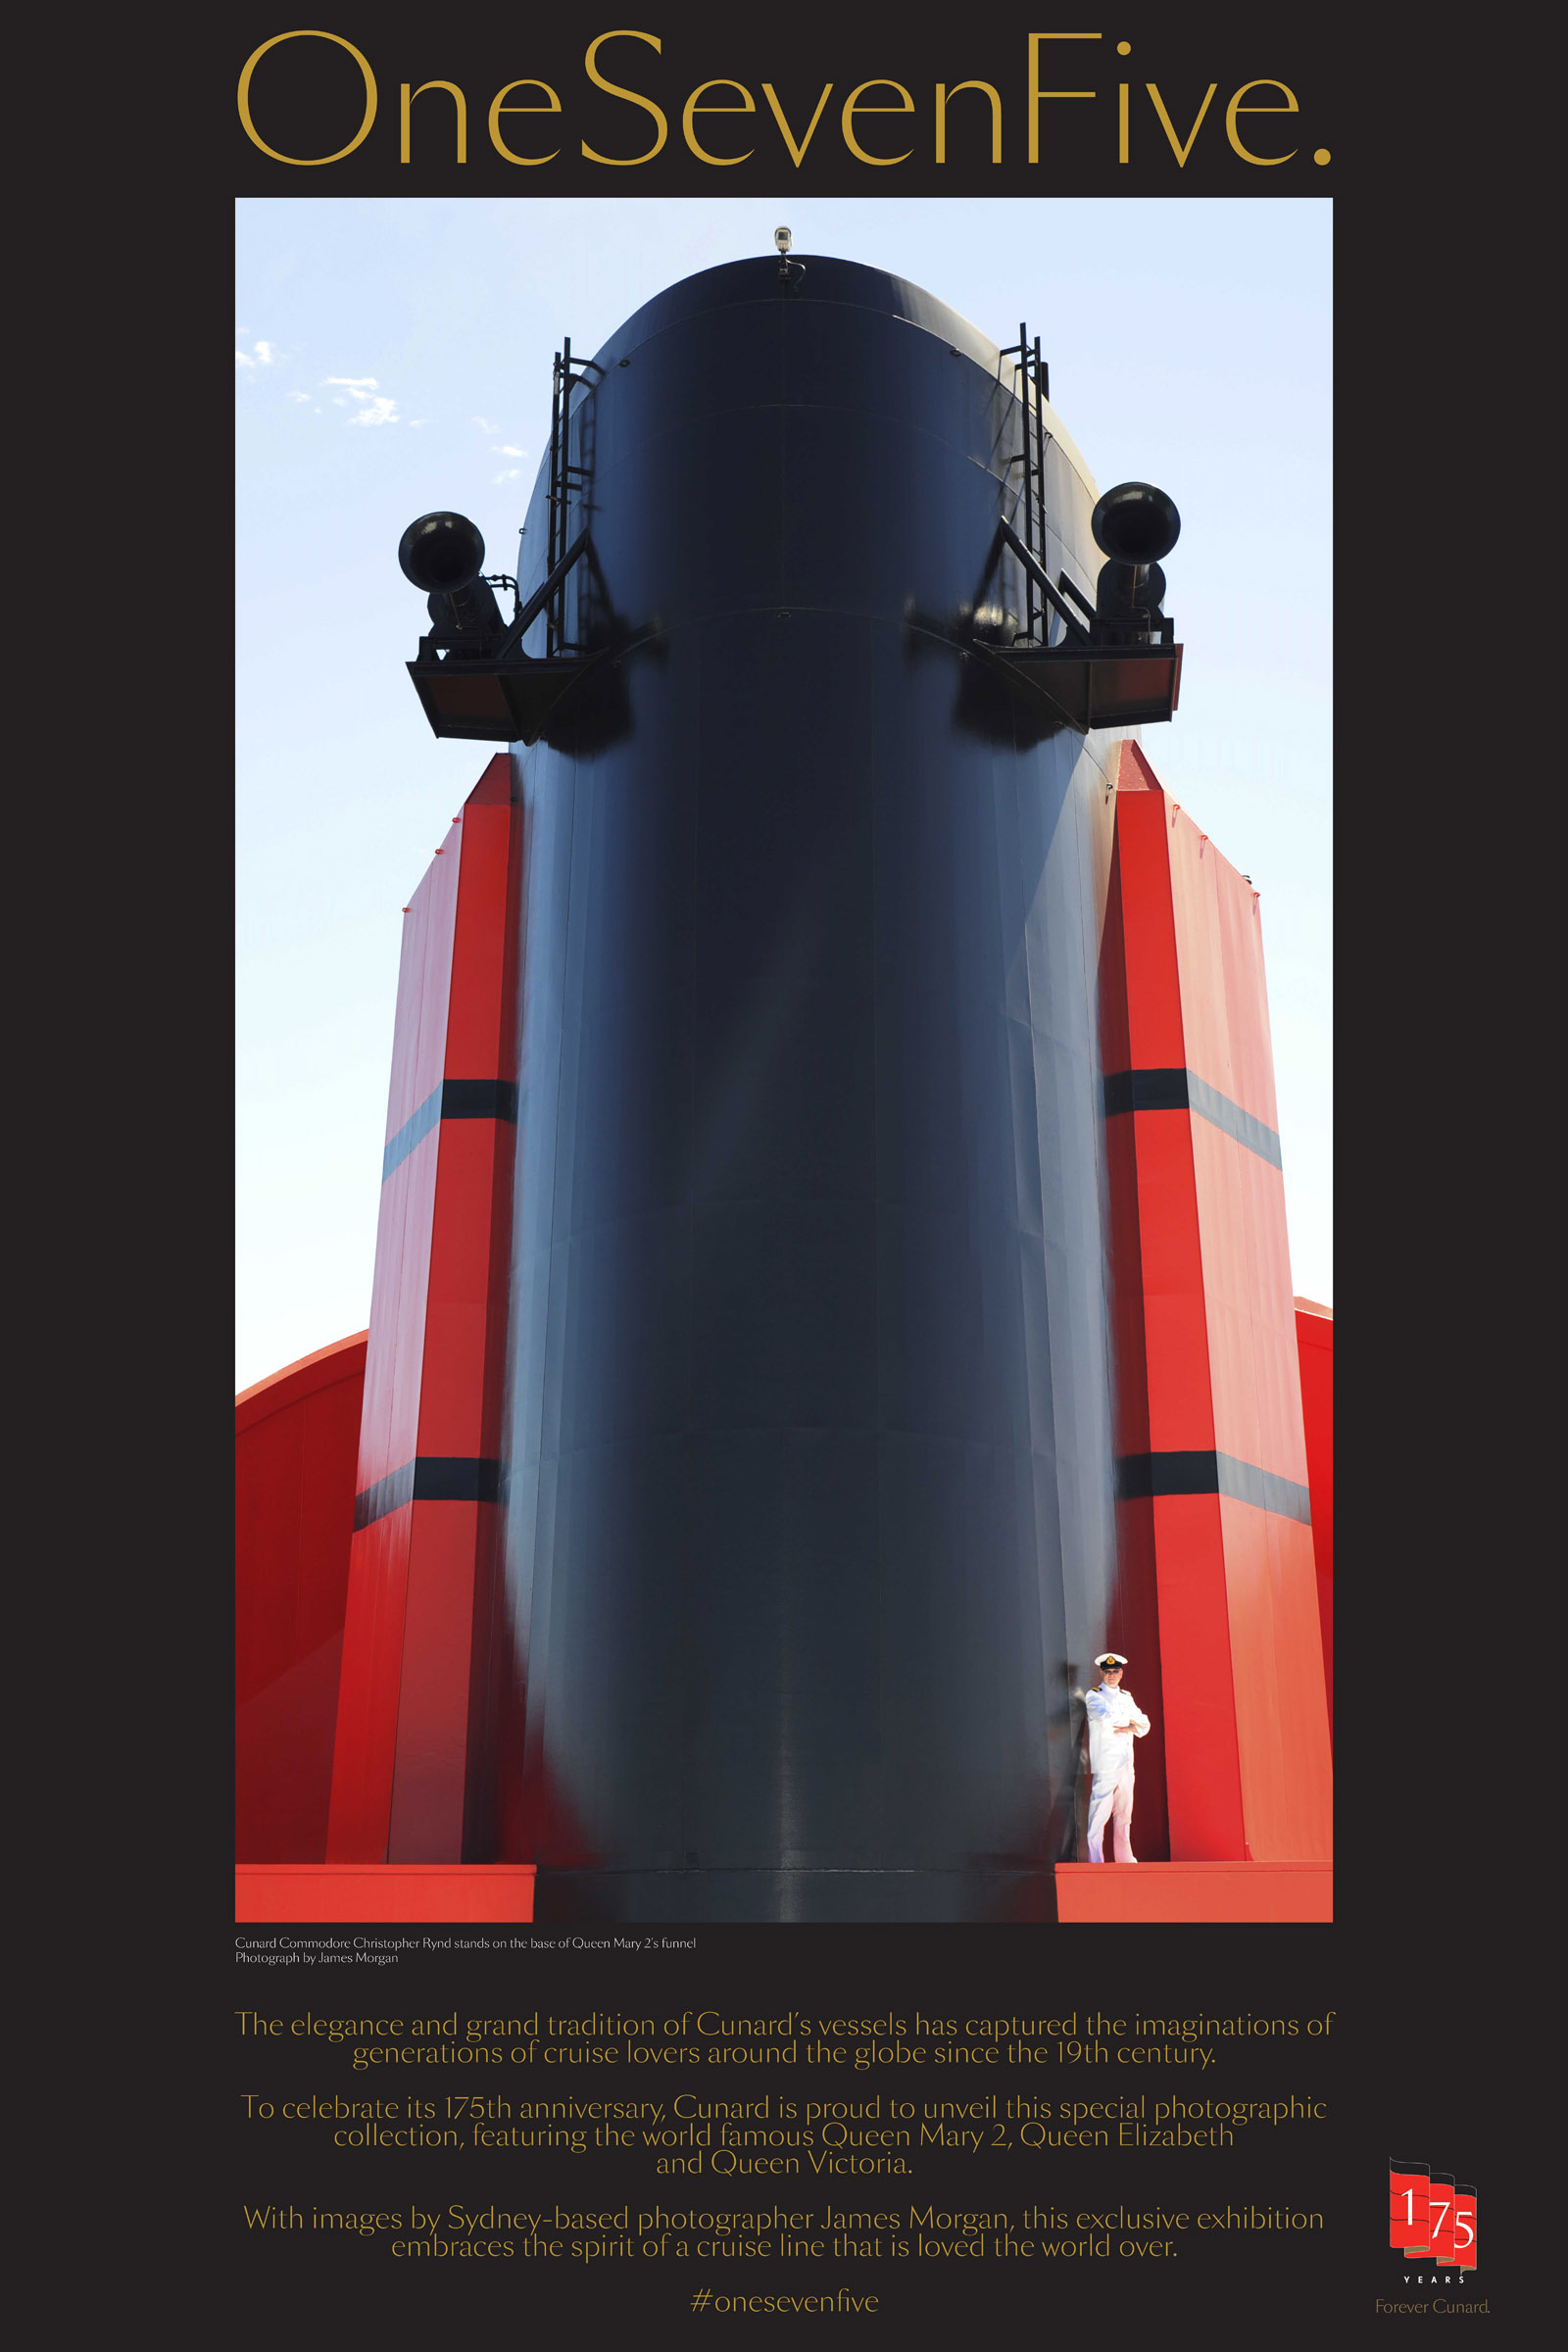 OneSevenFive - Commodore Christopher Rynd stands on Queen Mary 2s funnel. Photo by James Morgan